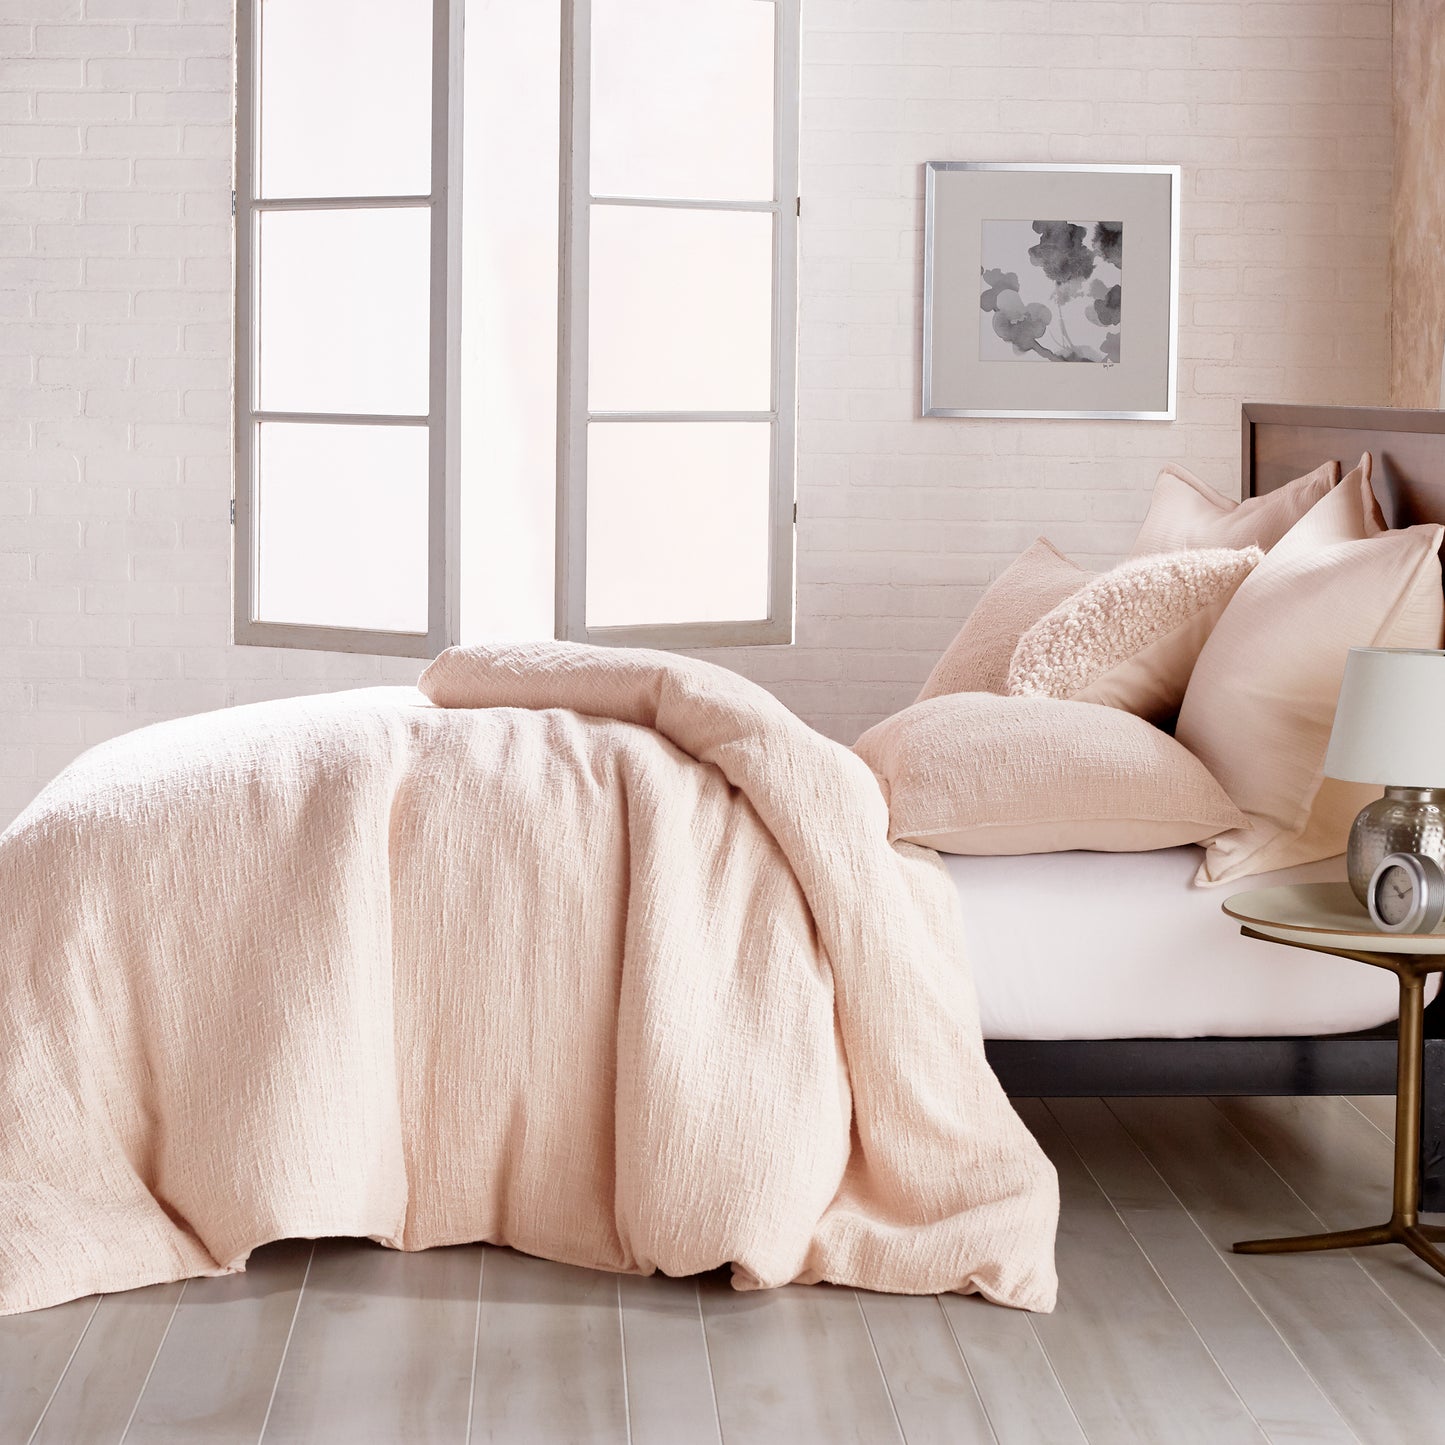 DKNY PURE Texture Bedding Duvet Collection Blush